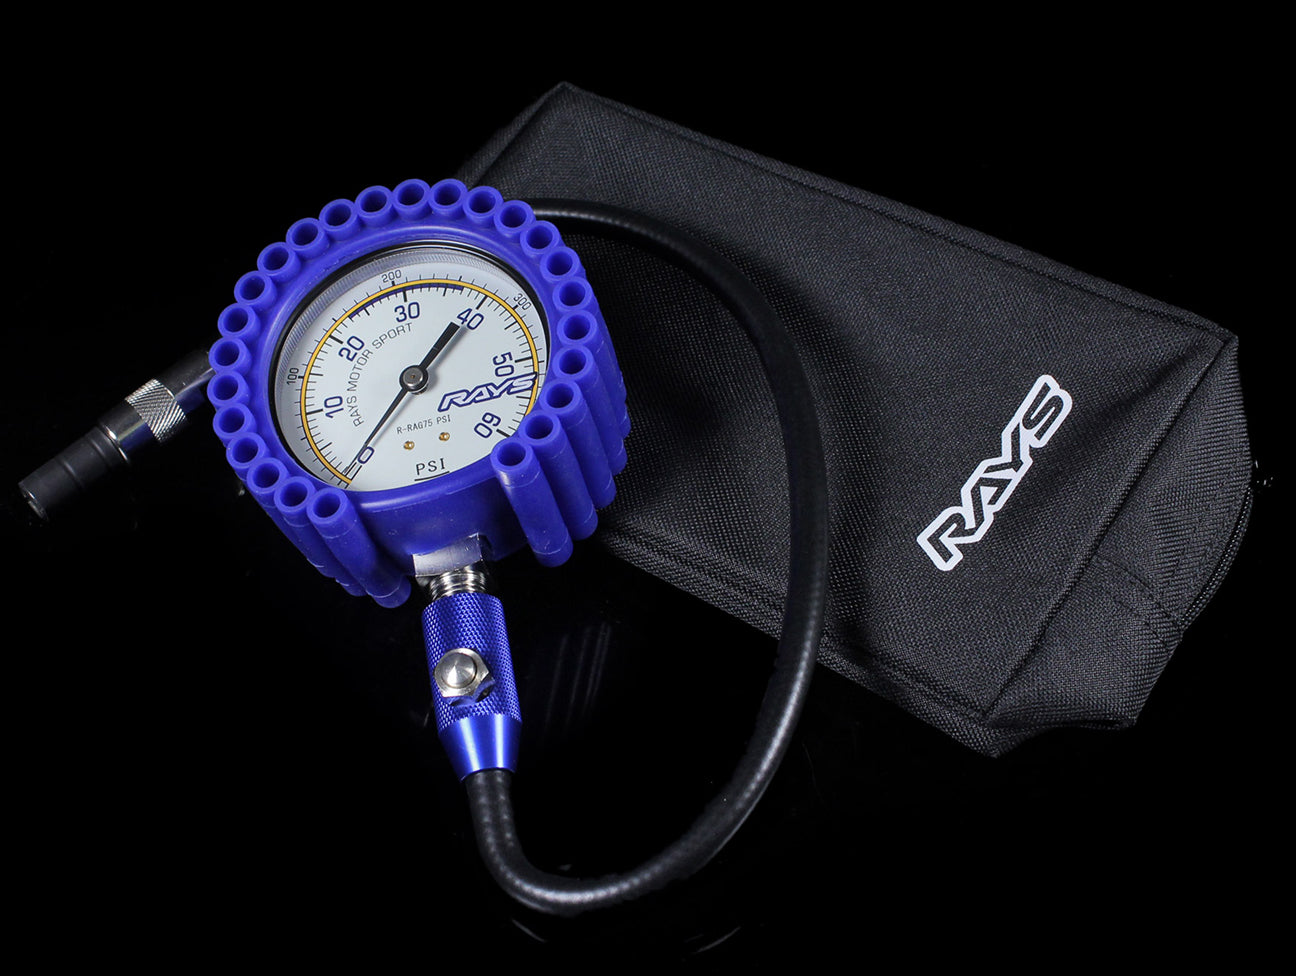 Rays Tire Pressure Air Gauge (75psi) w/ Carrying Case